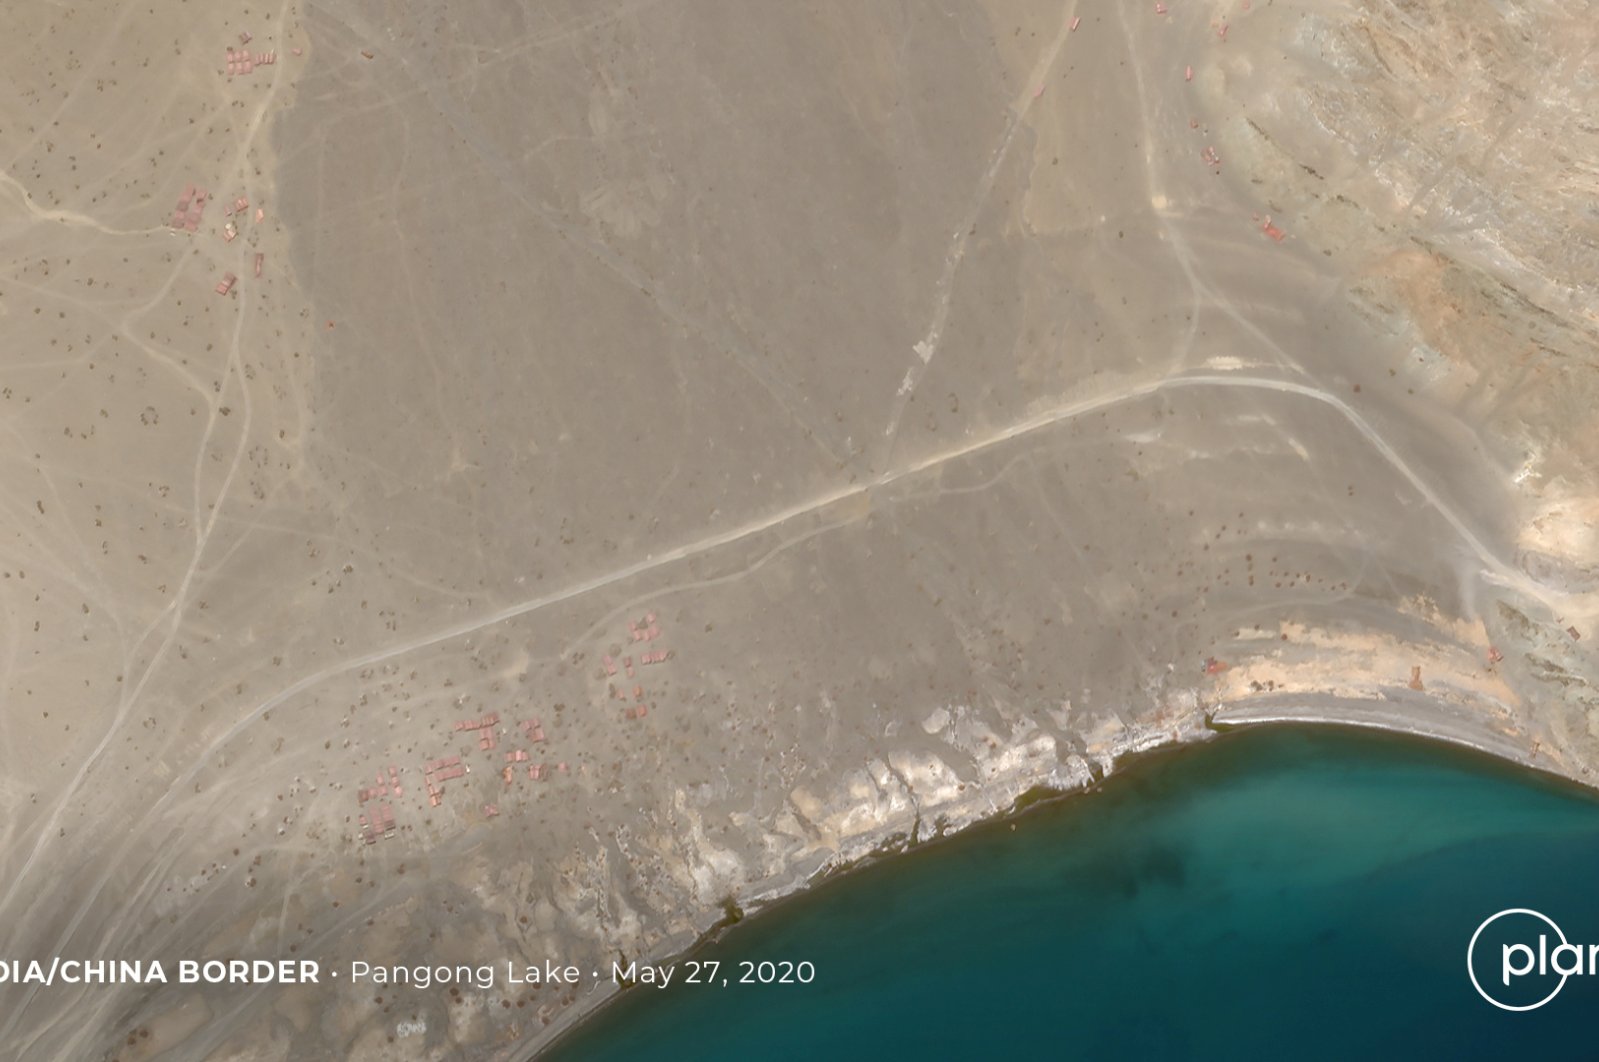 Buildup at the Line of Actual Control on the disputed border between China and India is seen in this handout satellite image of Pangong Lake, May 27, 2020. (REUTERS Photo)